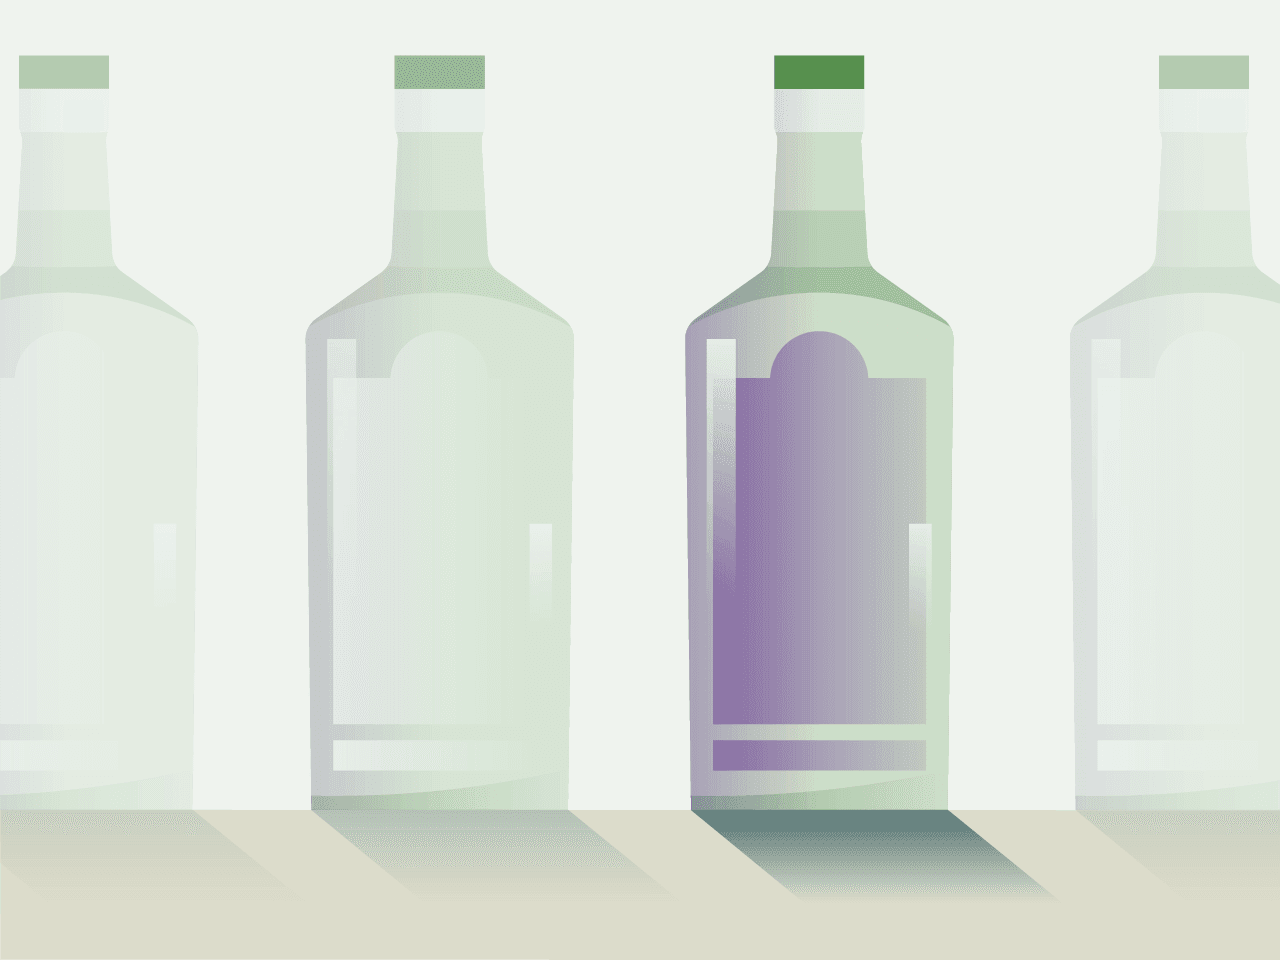 It’s believed roughly 25% of all alcohol consumed around the world is illicit (1) and drinking it can make you sick or even kill you. Here’s what you need to know.